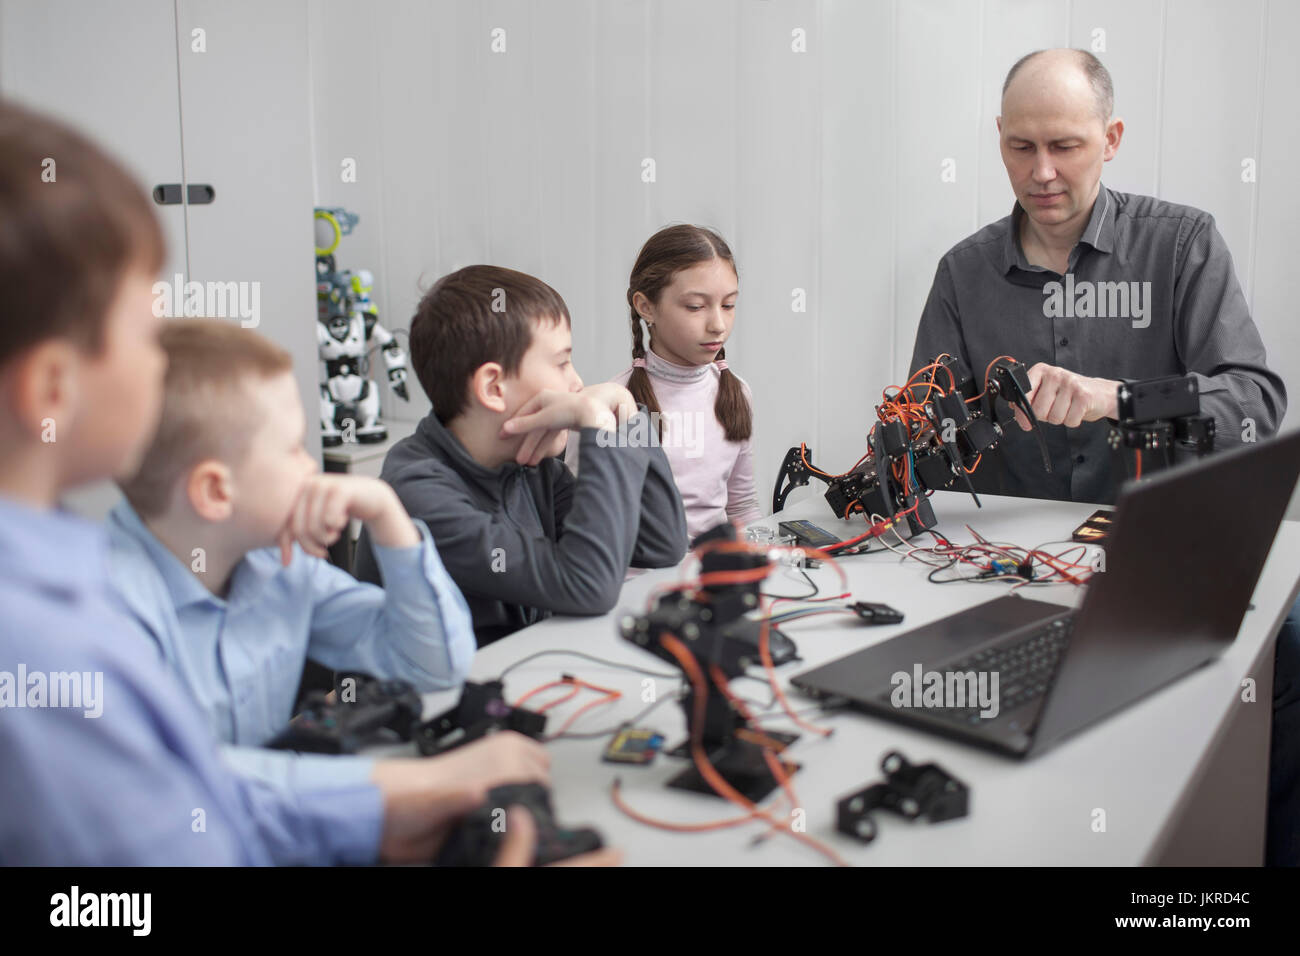 Students looking at teacher operating machinery at table in classroom Stock Photo